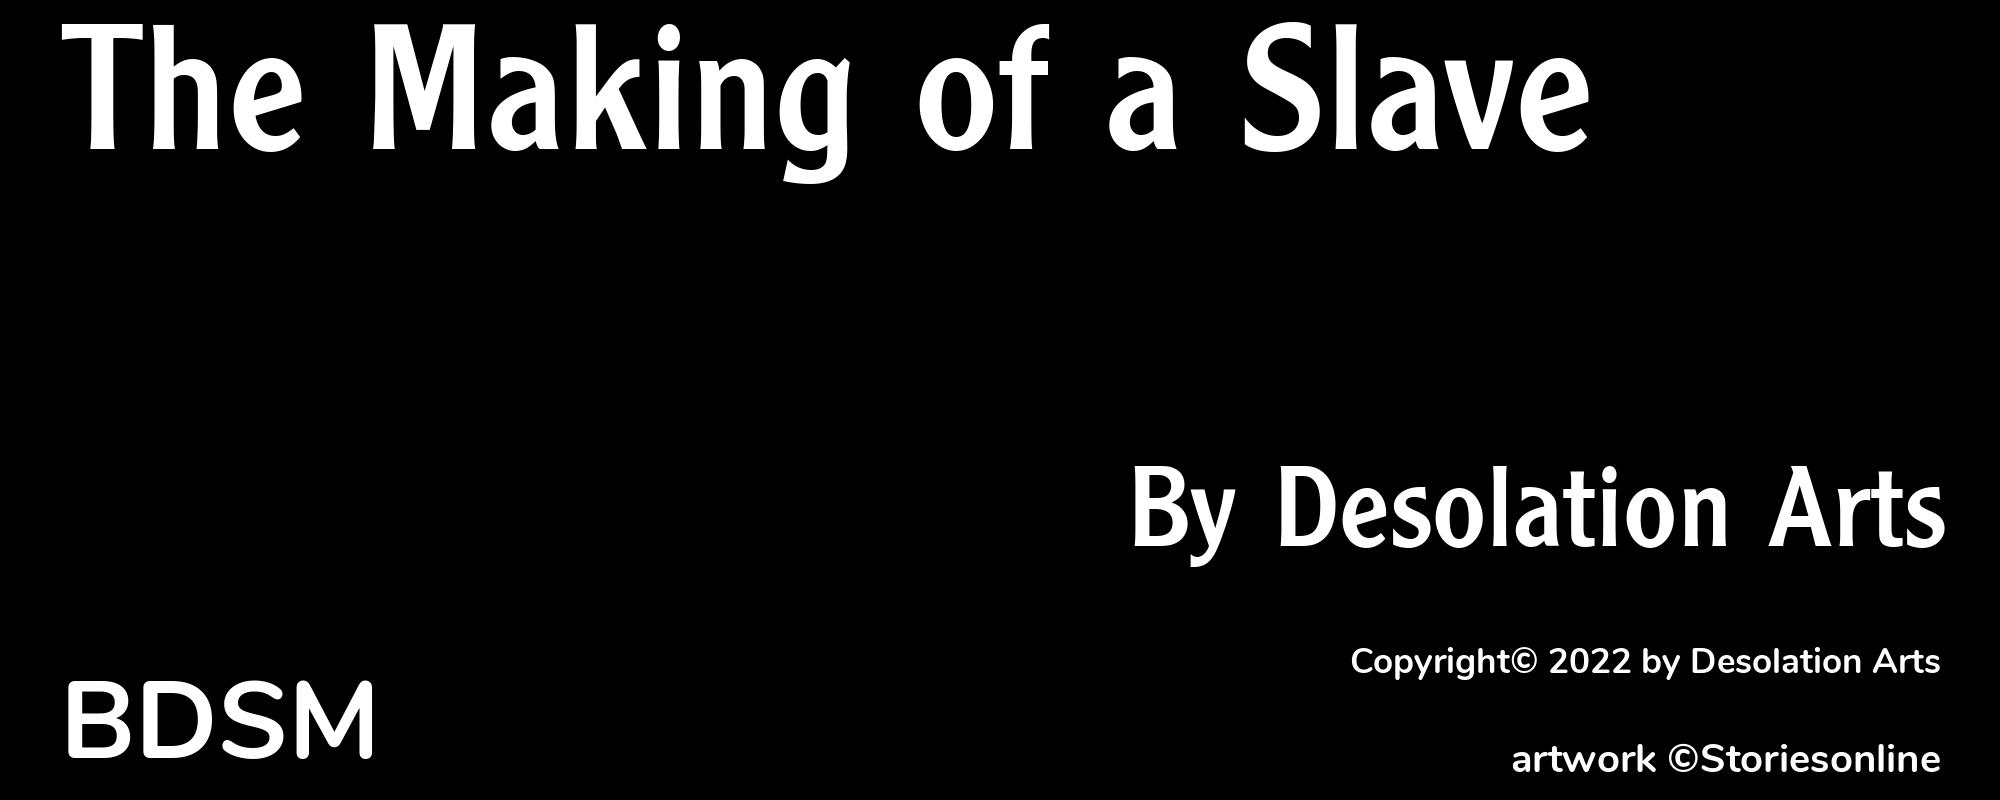 The Making of a Slave - Cover